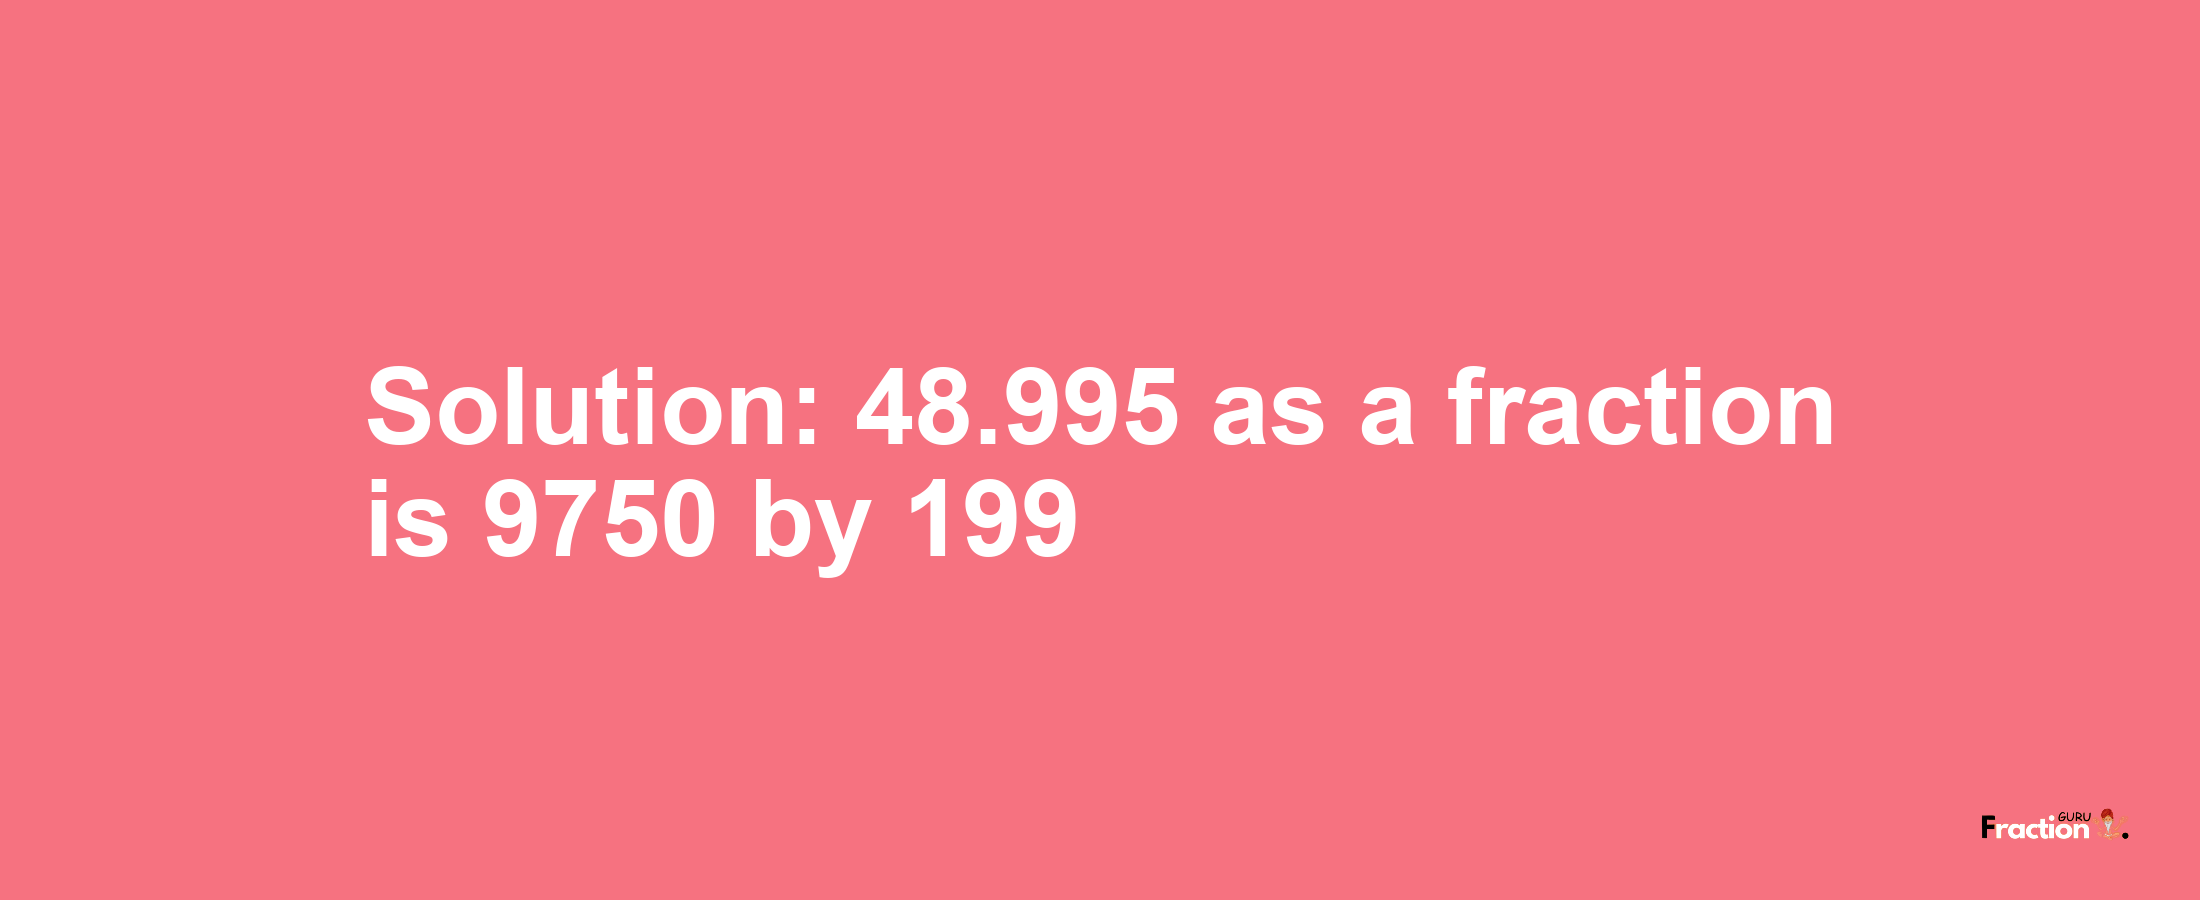 Solution:48.995 as a fraction is 9750/199